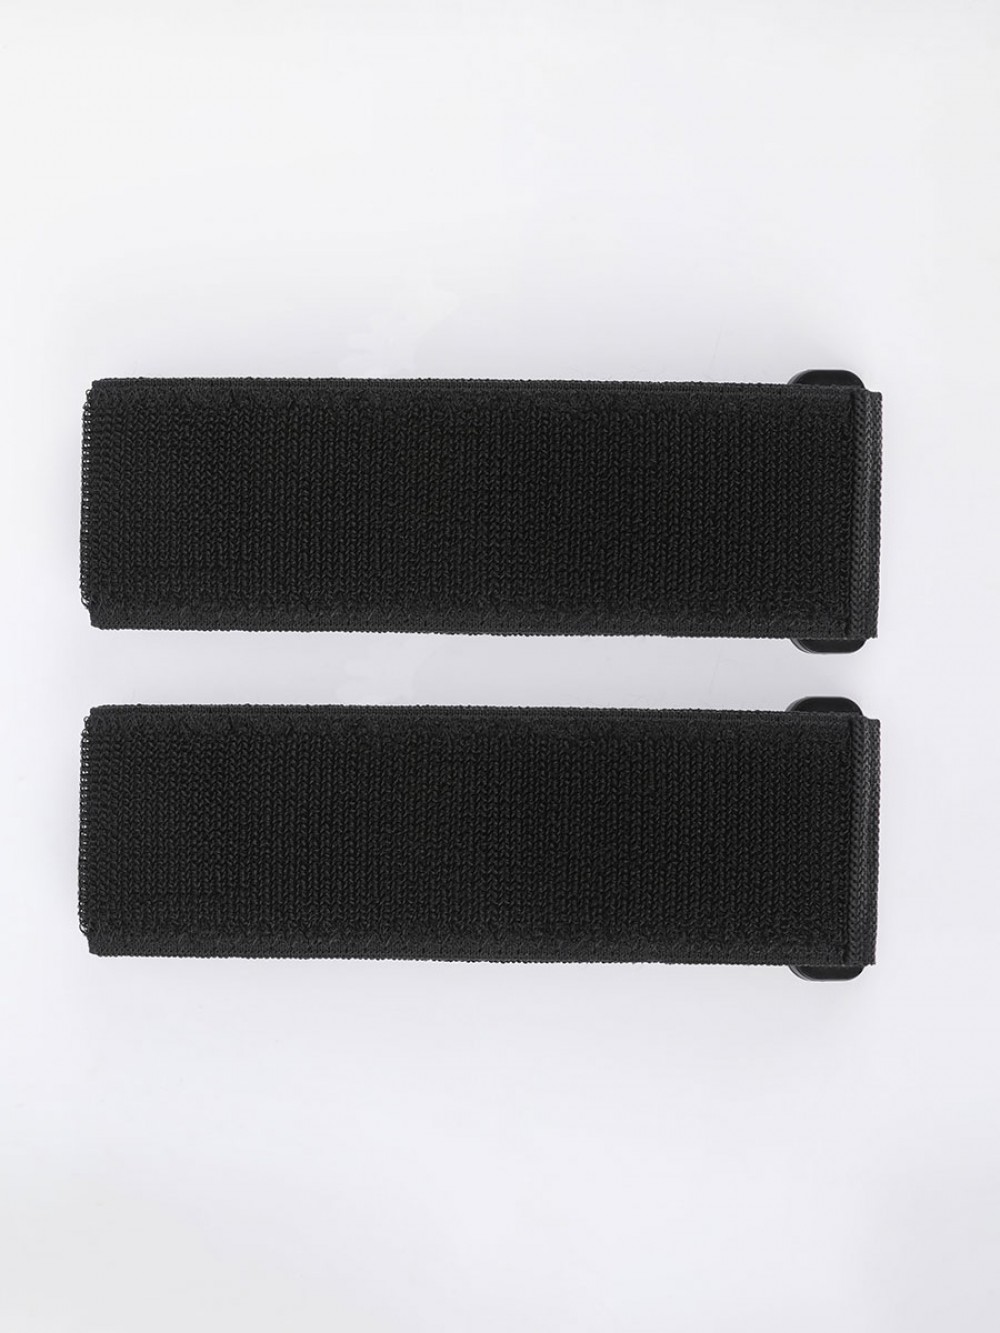 Hot Selling Arm and Legs Flow Restriction Band